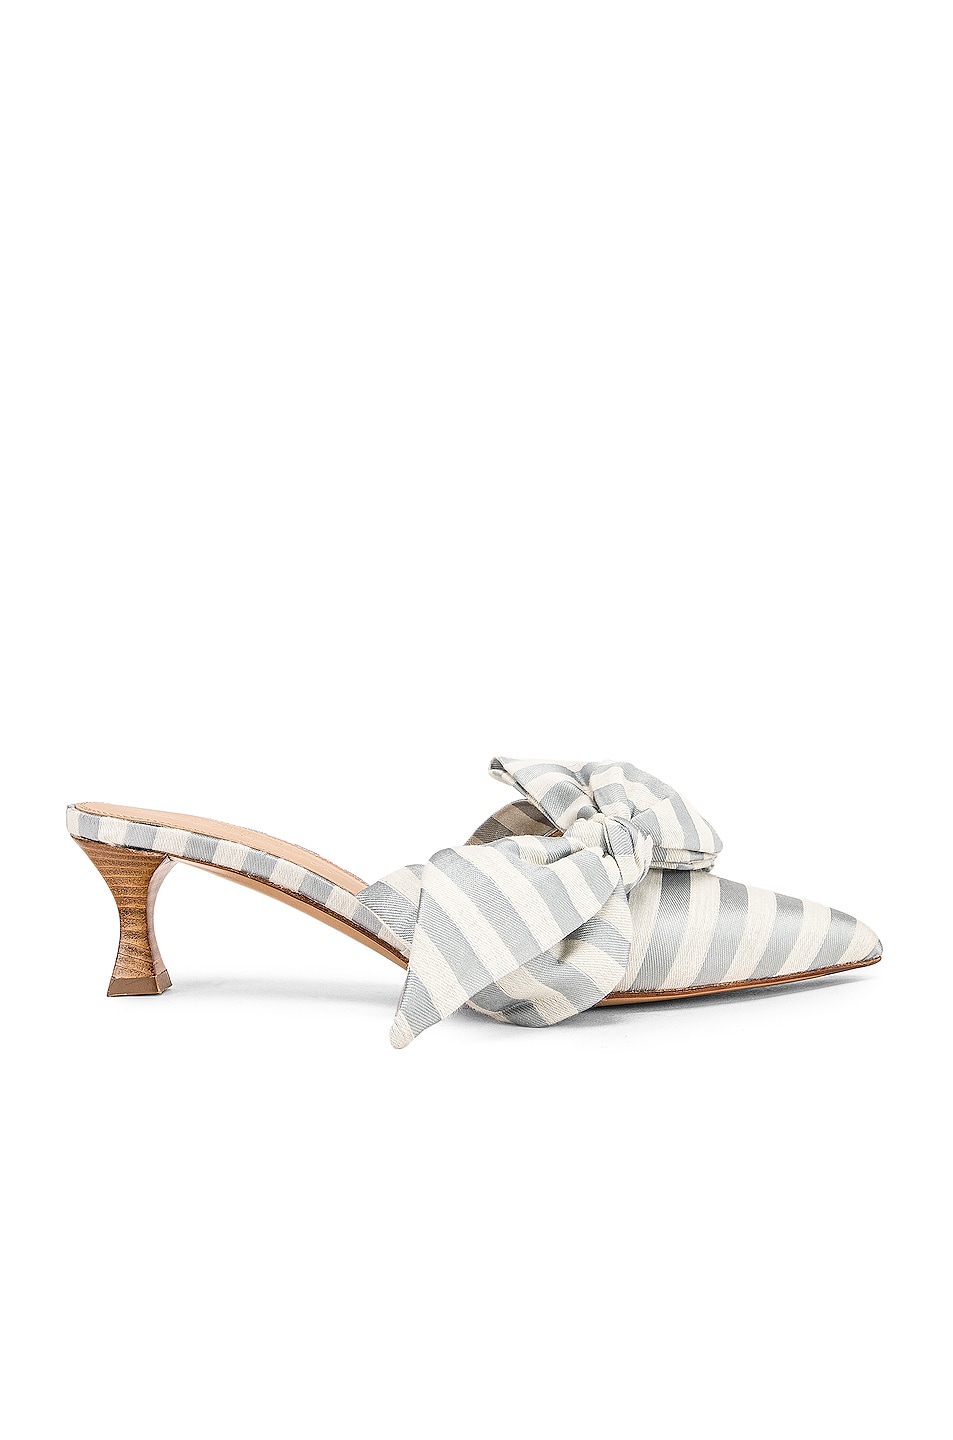 Image 1 of Brock Collection Tess Stripes Bow Heels in Light Blue & White